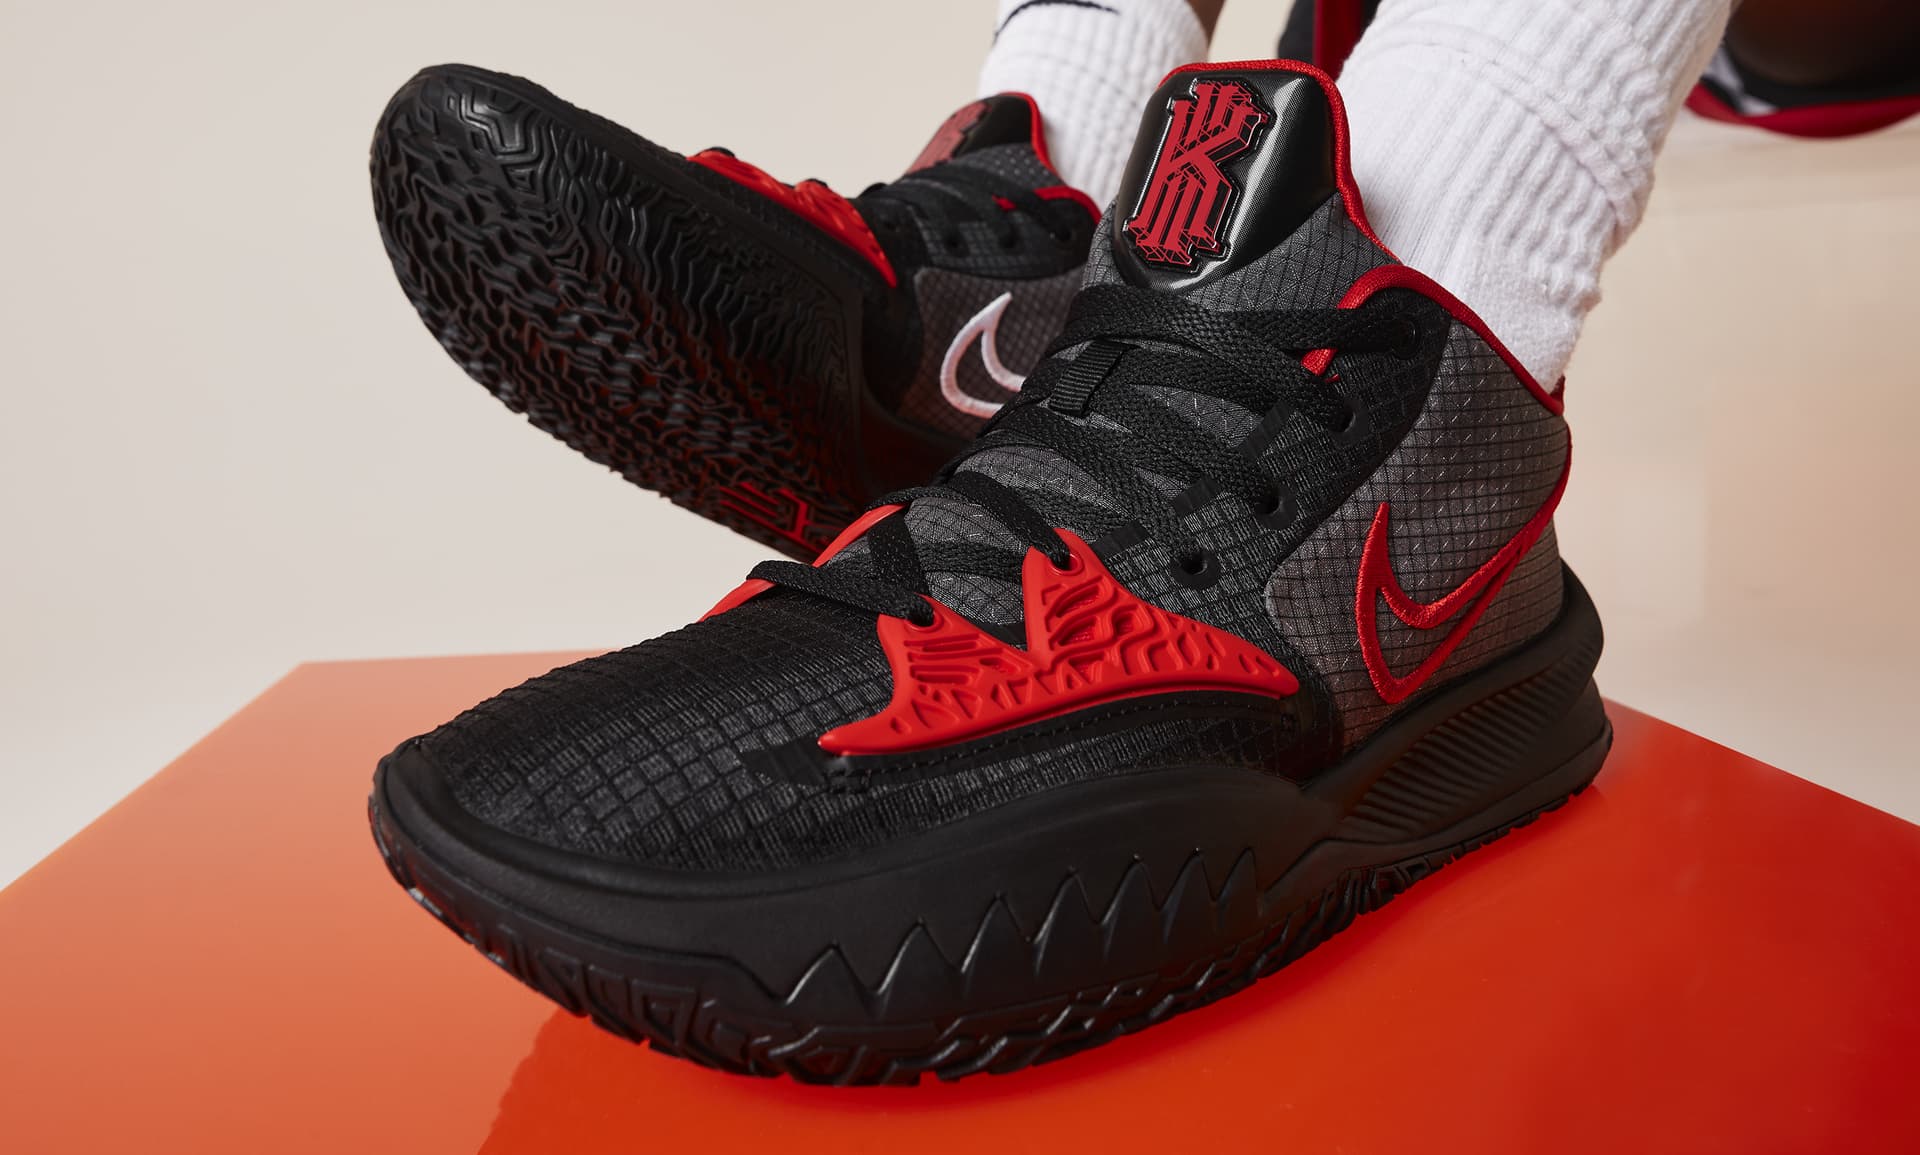 NIKE Kyrie low 4 EP